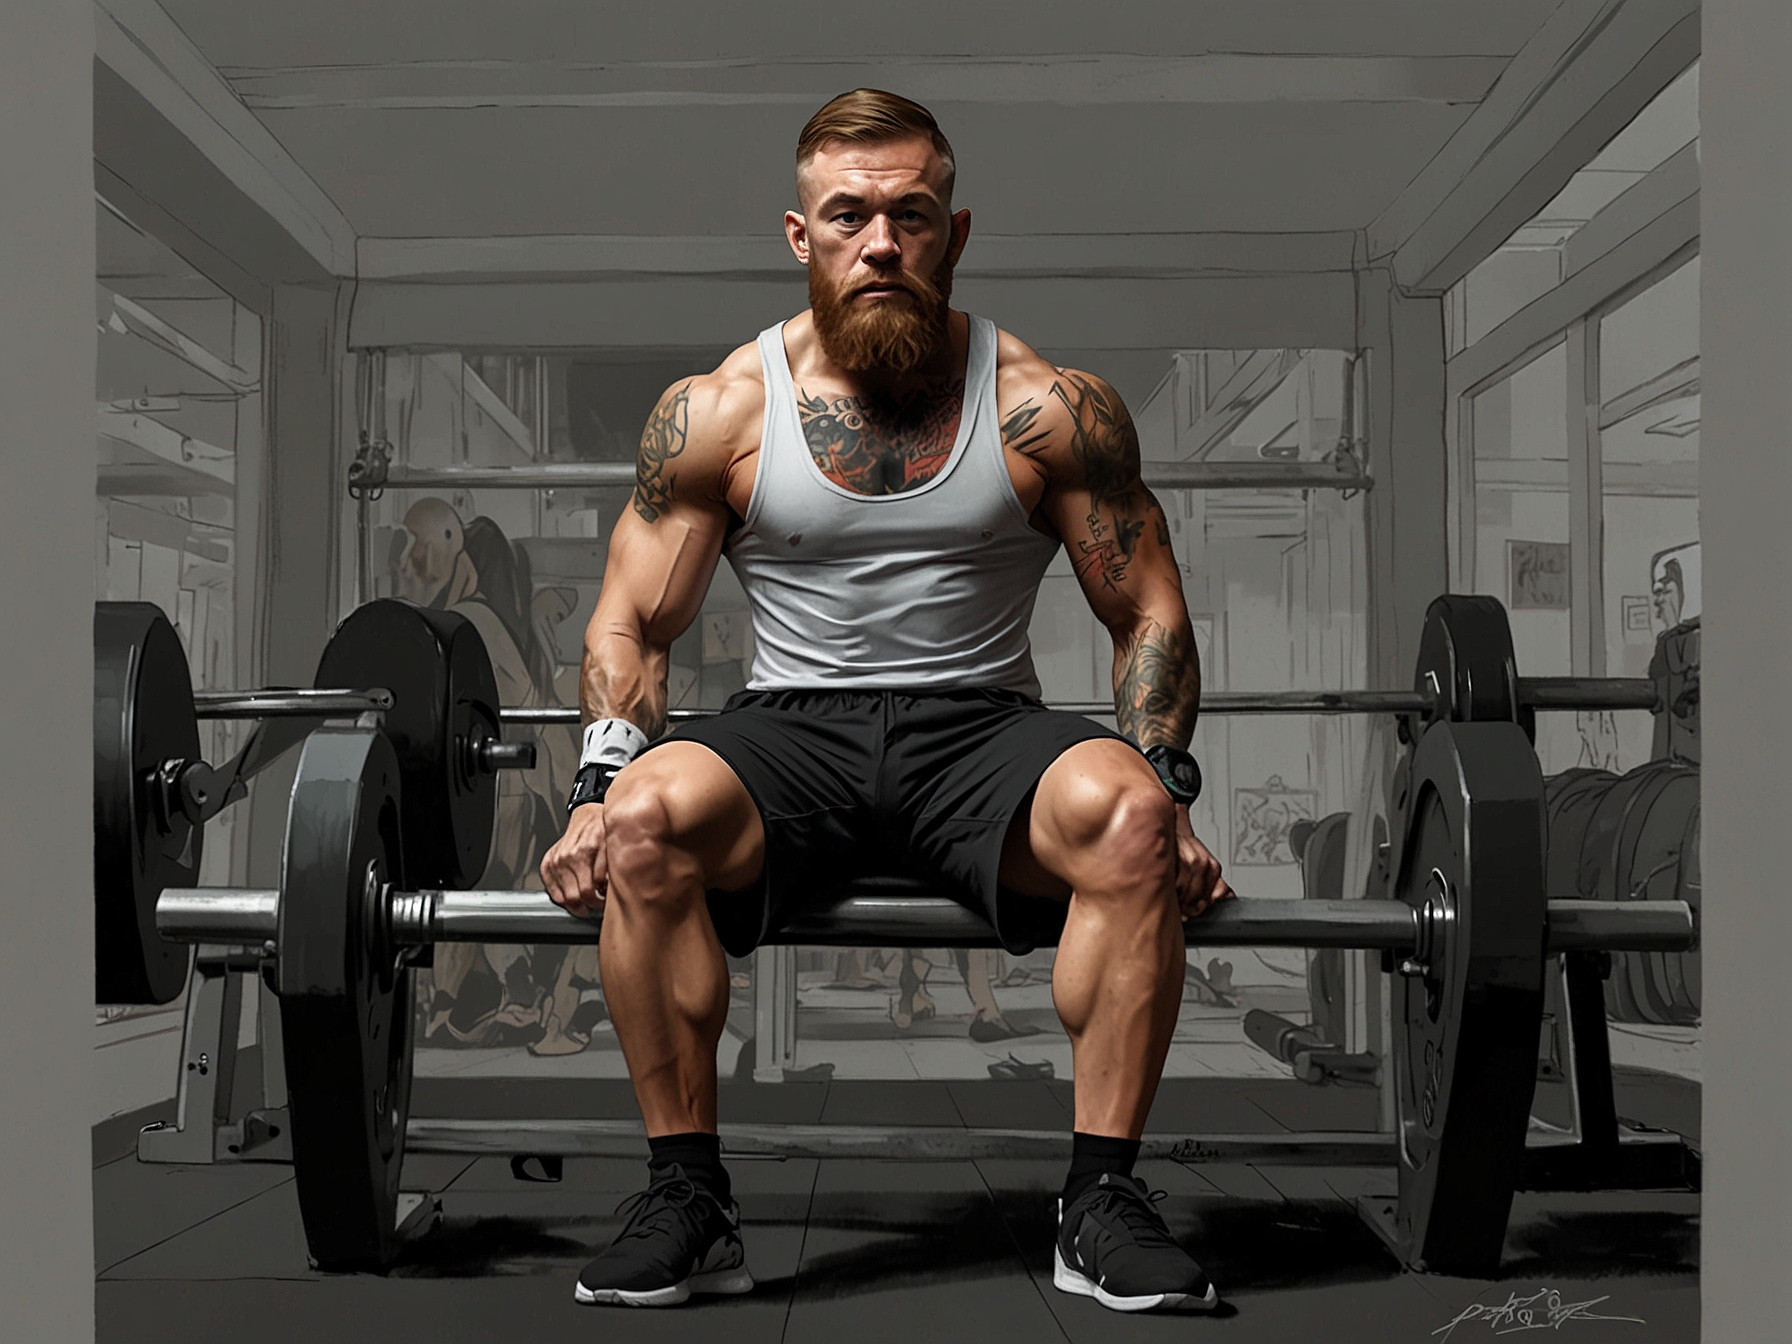 Conor McGregor training at the gym, illustrating his journey towards recovery from a serious leg injury.